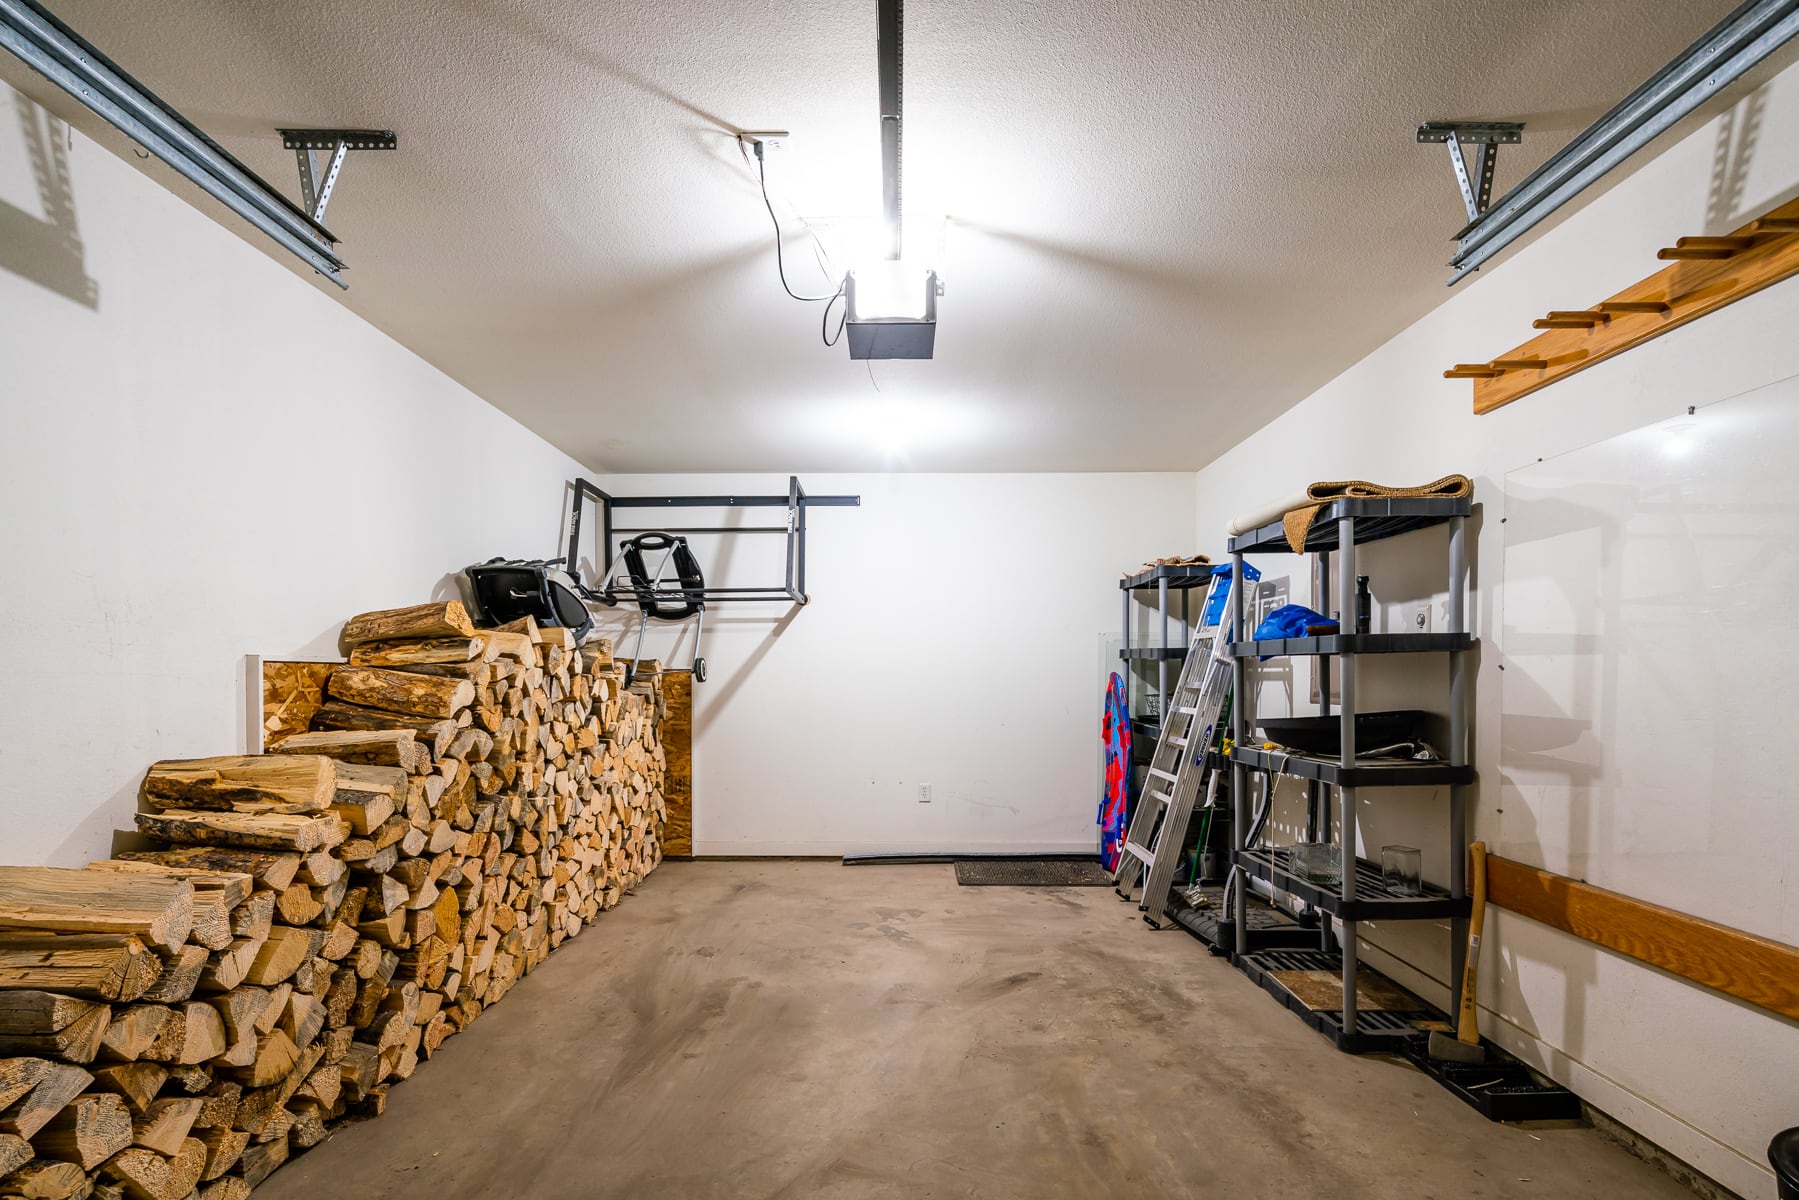 79 Starlight Drive inside the attached garage with a stack of firewood along the wall to the left, and plastic shelves along the right